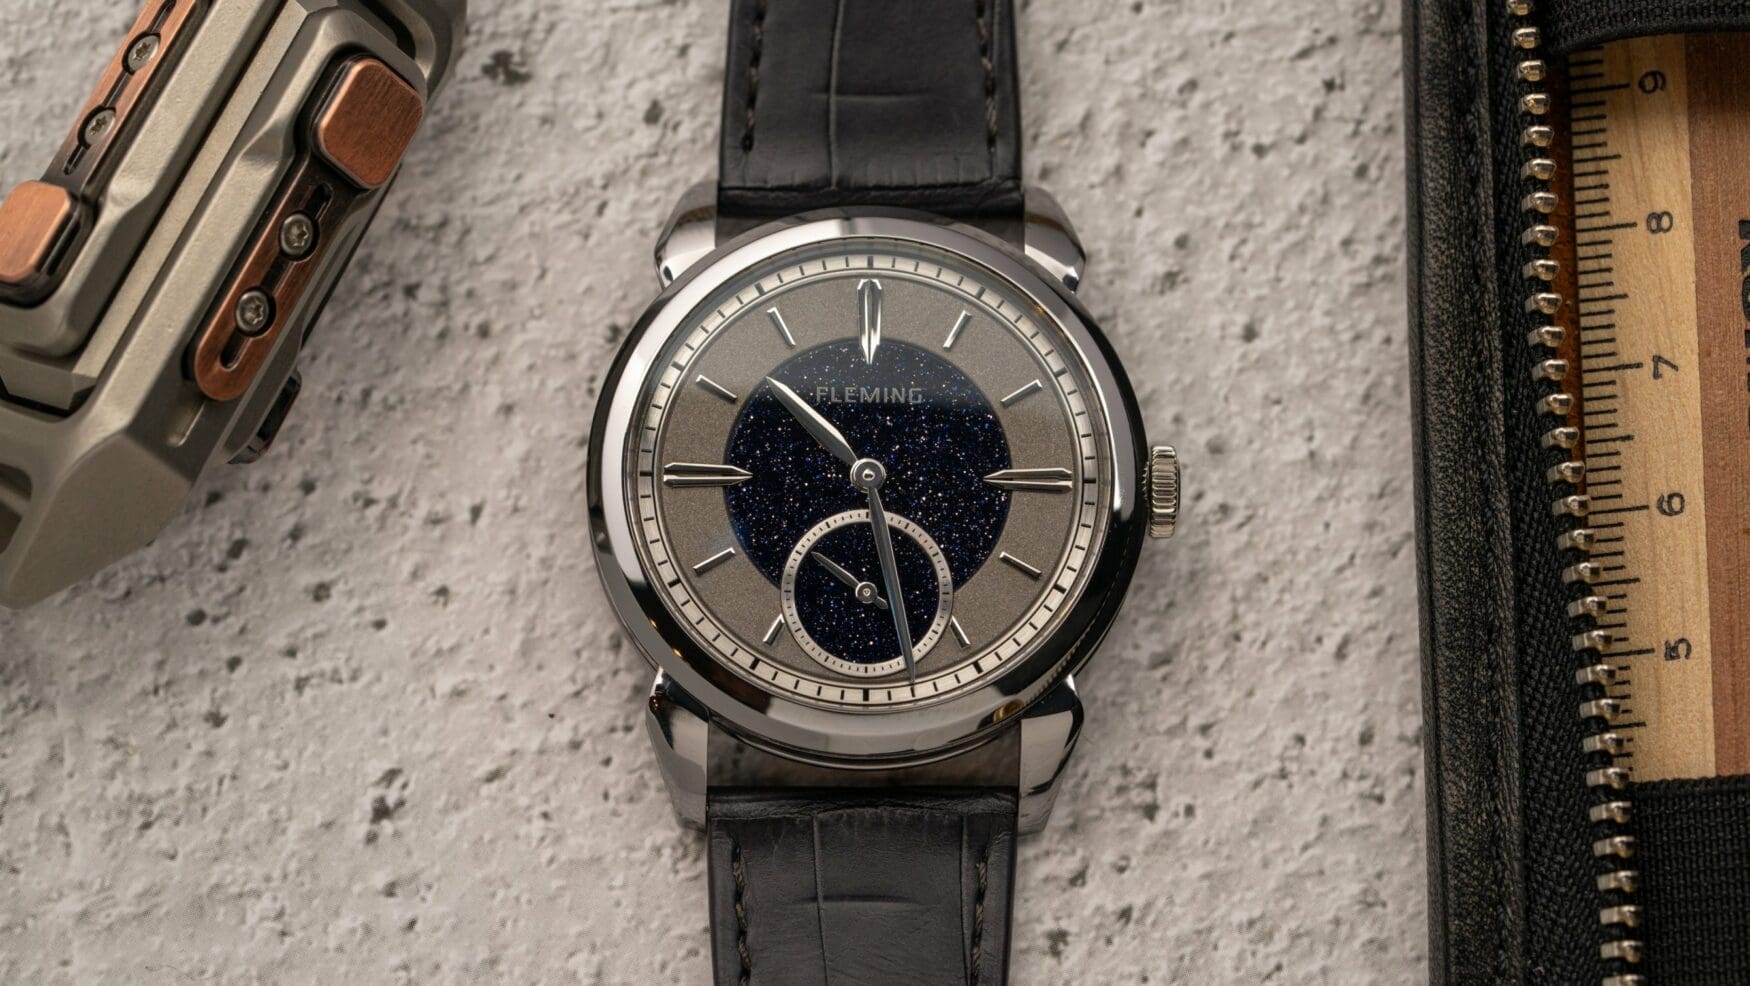 The long-awaited Fleming Series 1 is finally here, with Comblémine dials and a stunning Chronode movement (live pics)